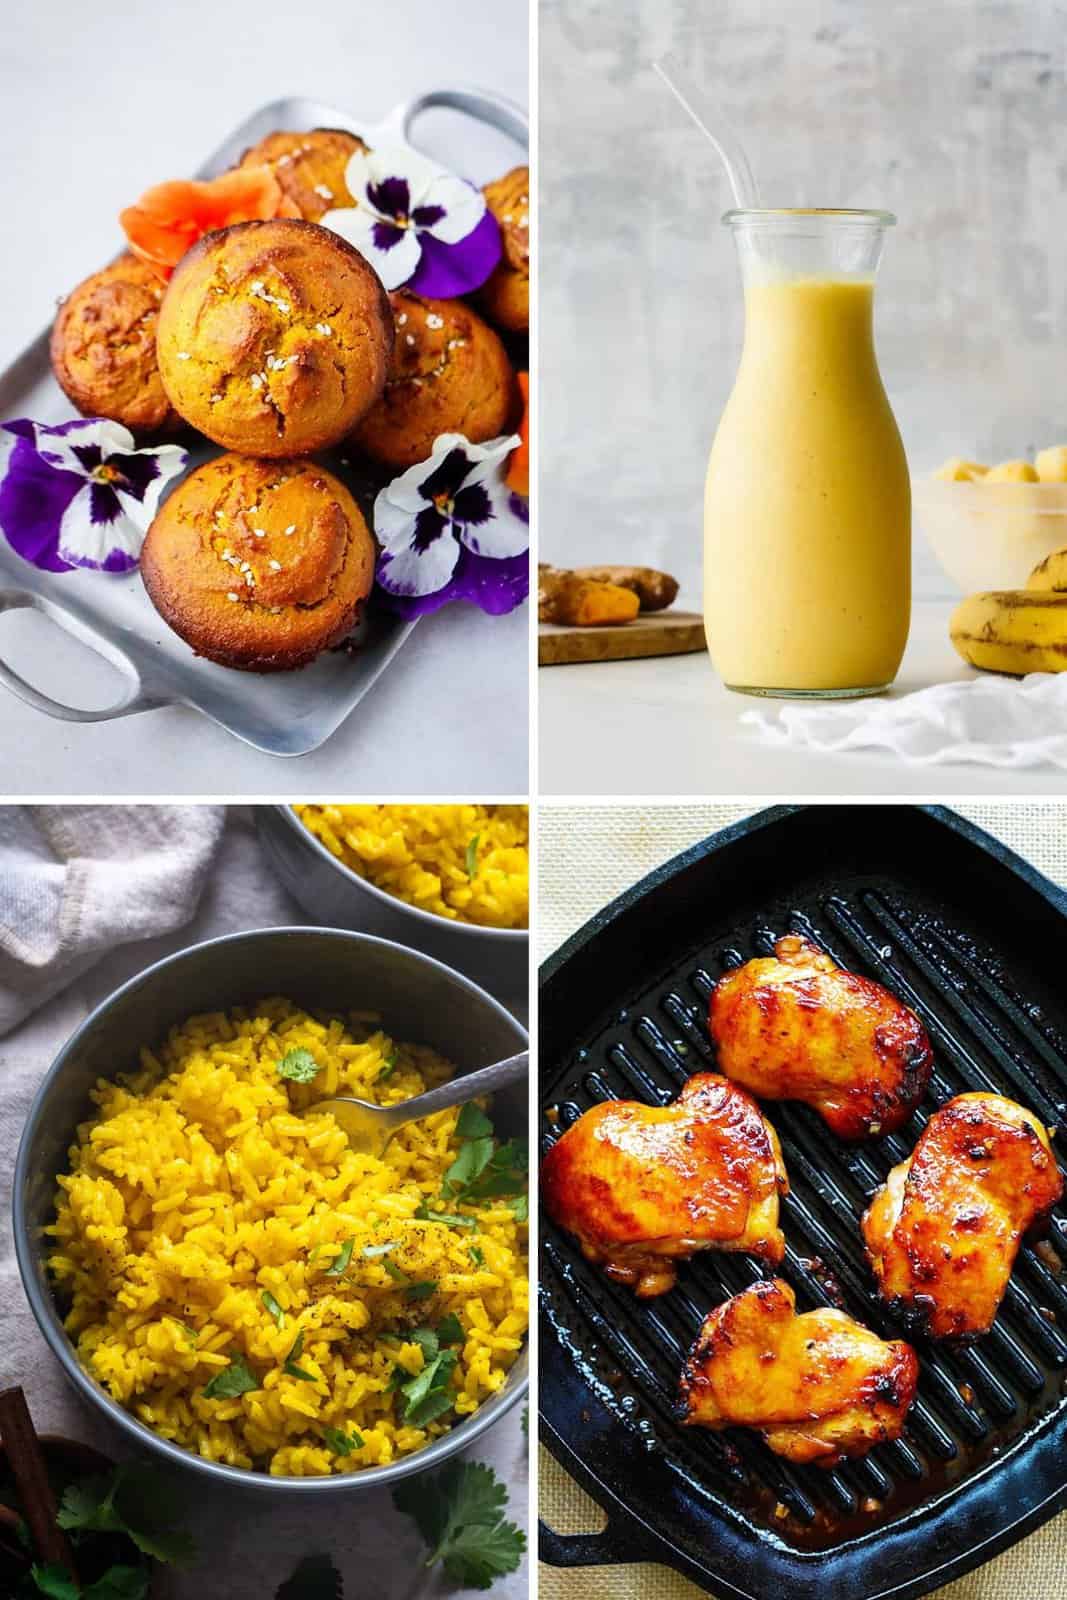 Collage of various turmeric recipes